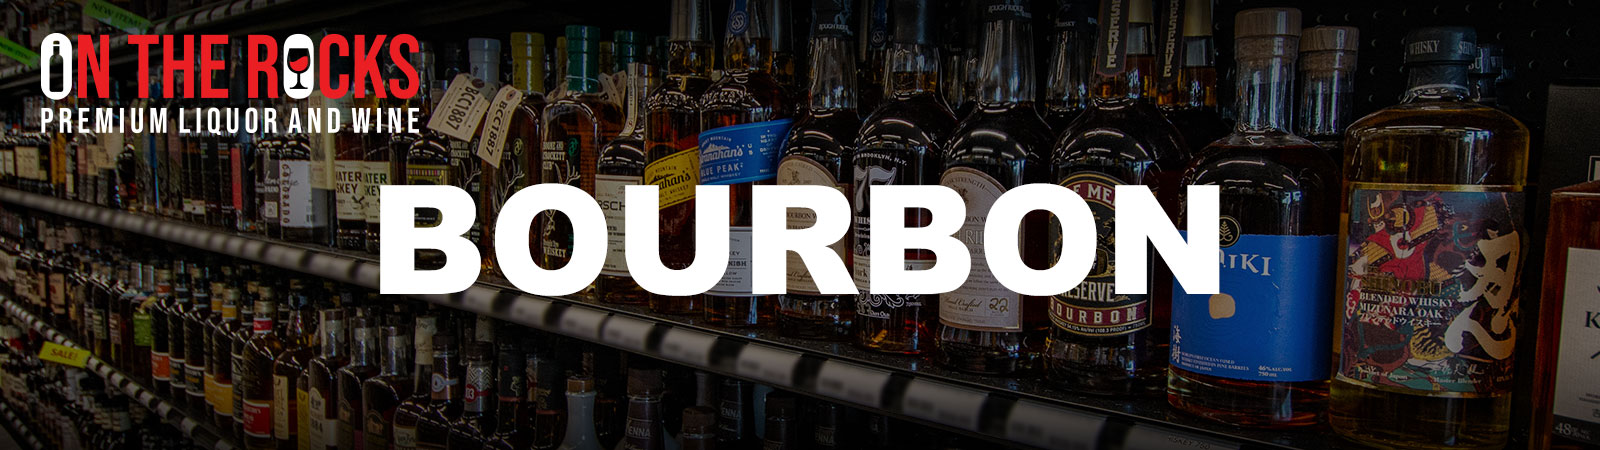 On-The-Rocks-Premium-Liquor-and-Wine-St.-Charles-Bourbon-Page-Banner